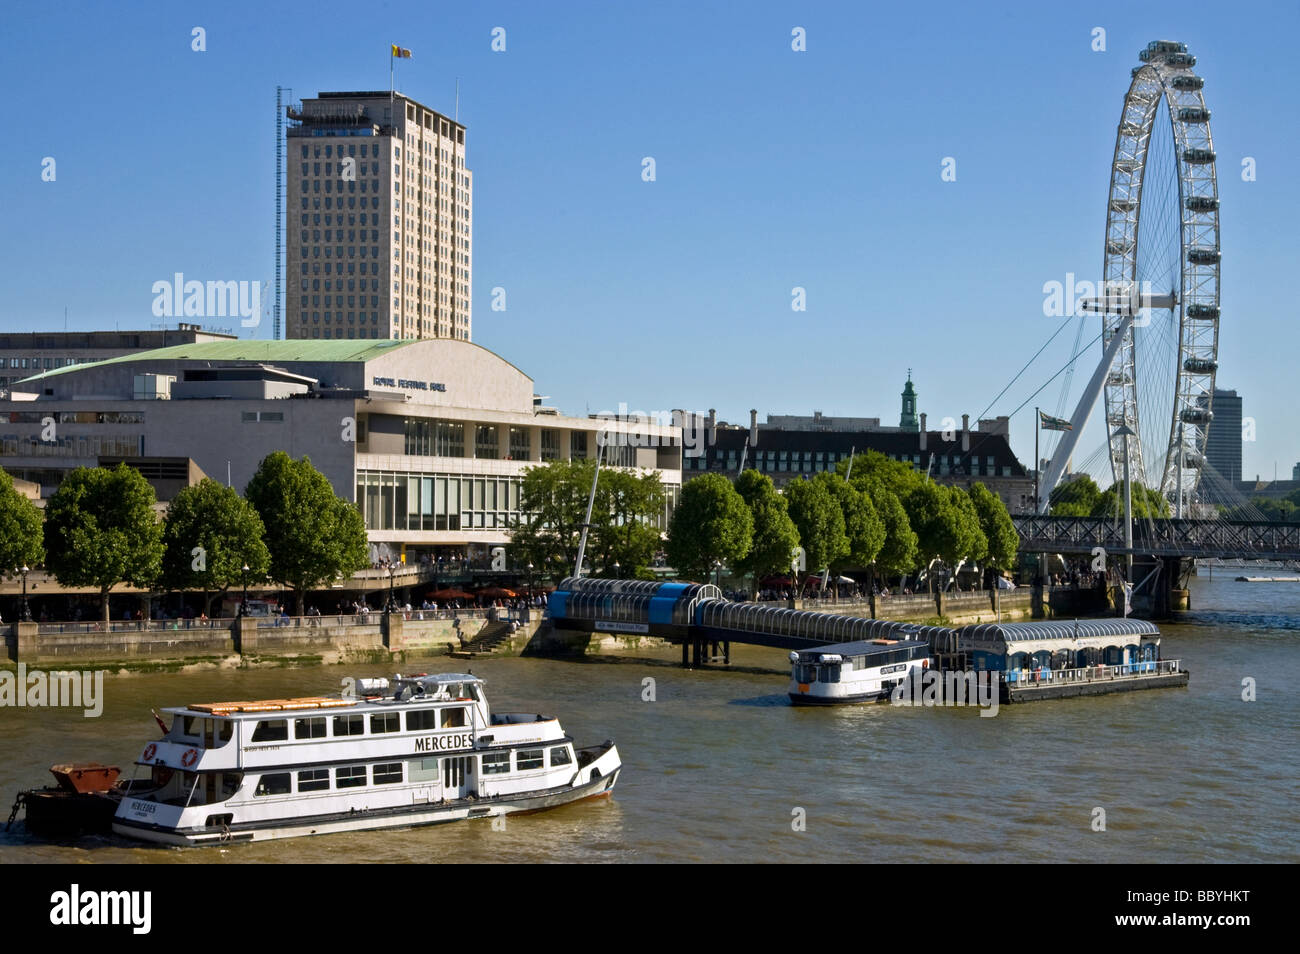 The Royal Festival Hall and London Eye with Boat and Pier in foreground. Stock Photo